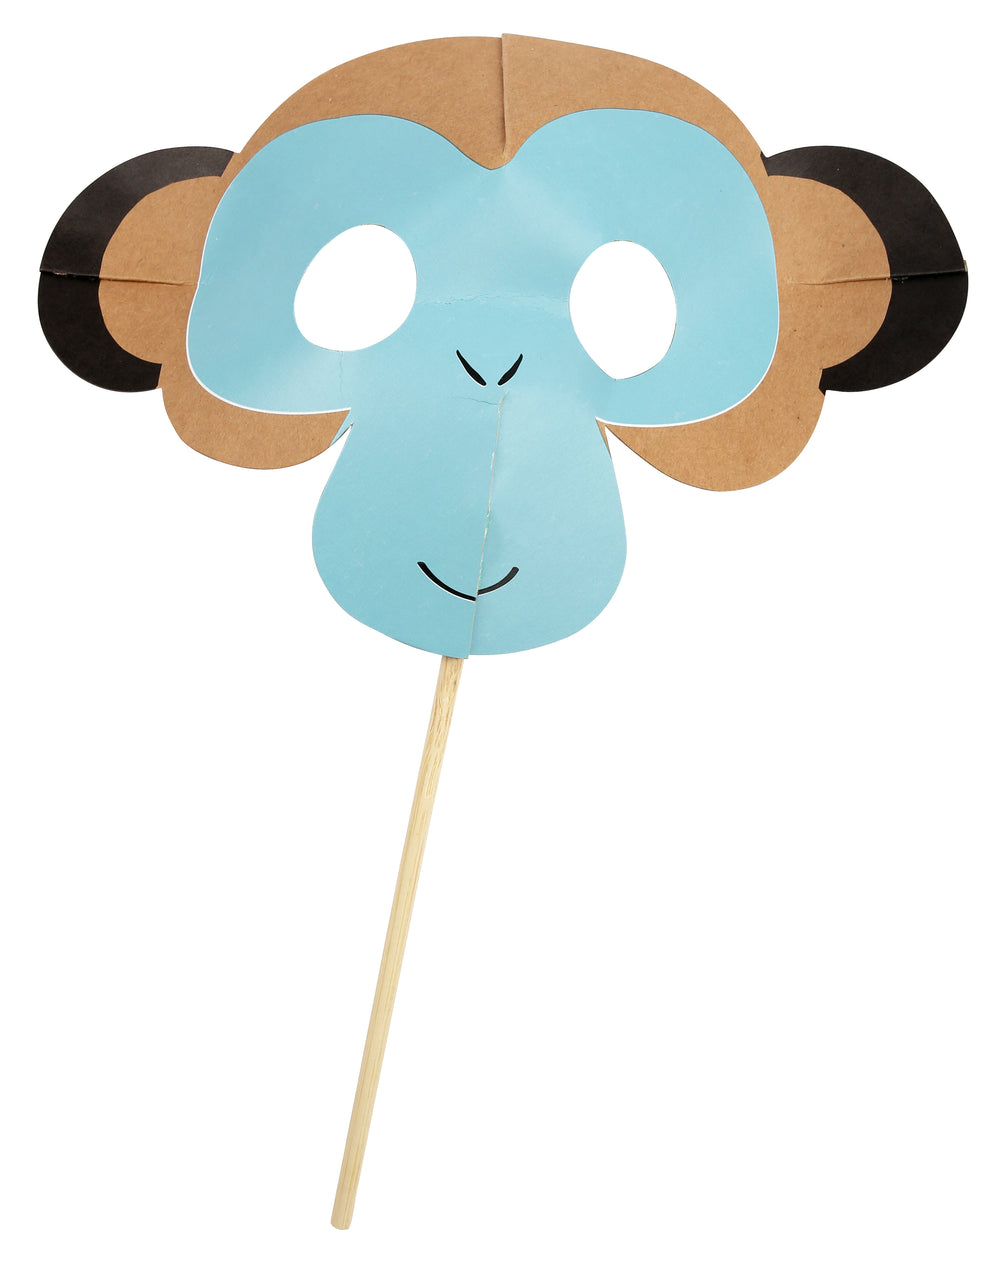 brown and aqua paper party monkey mask with wood dowels to hold mask, four per package includes four tiger masks, perfect for party decor or guest favors